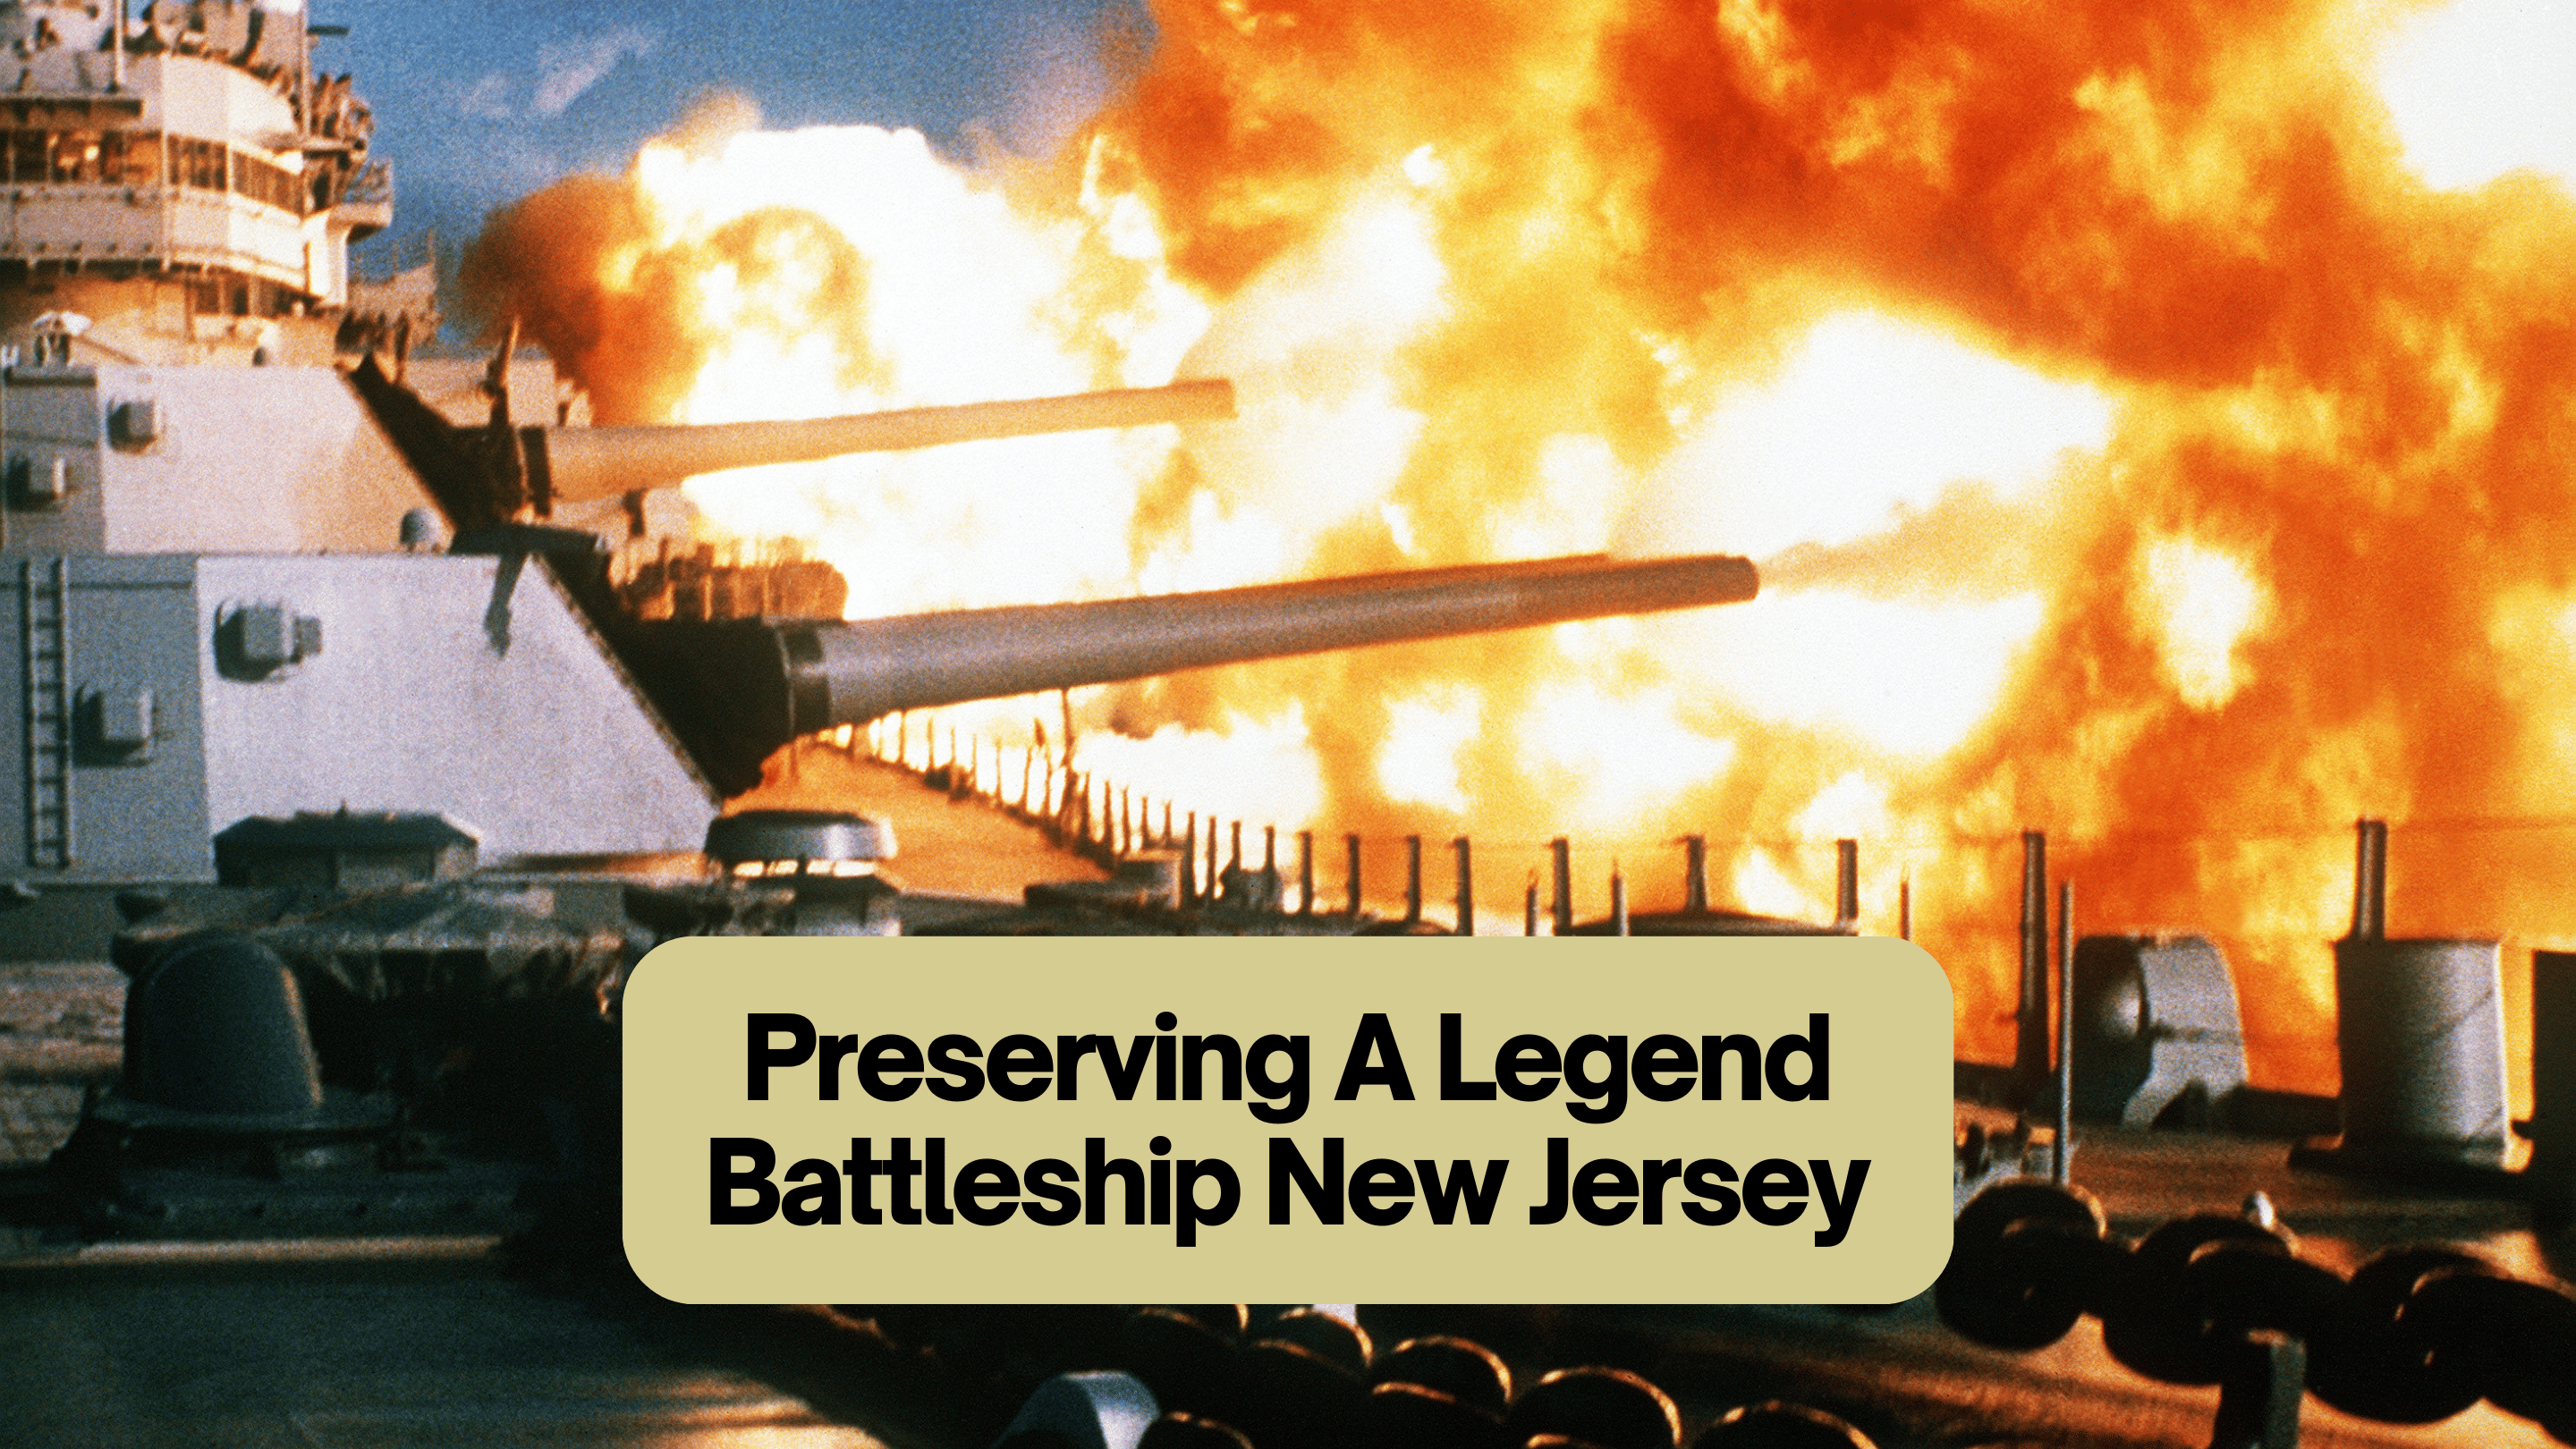 Battleship New Jersey To Move This Week